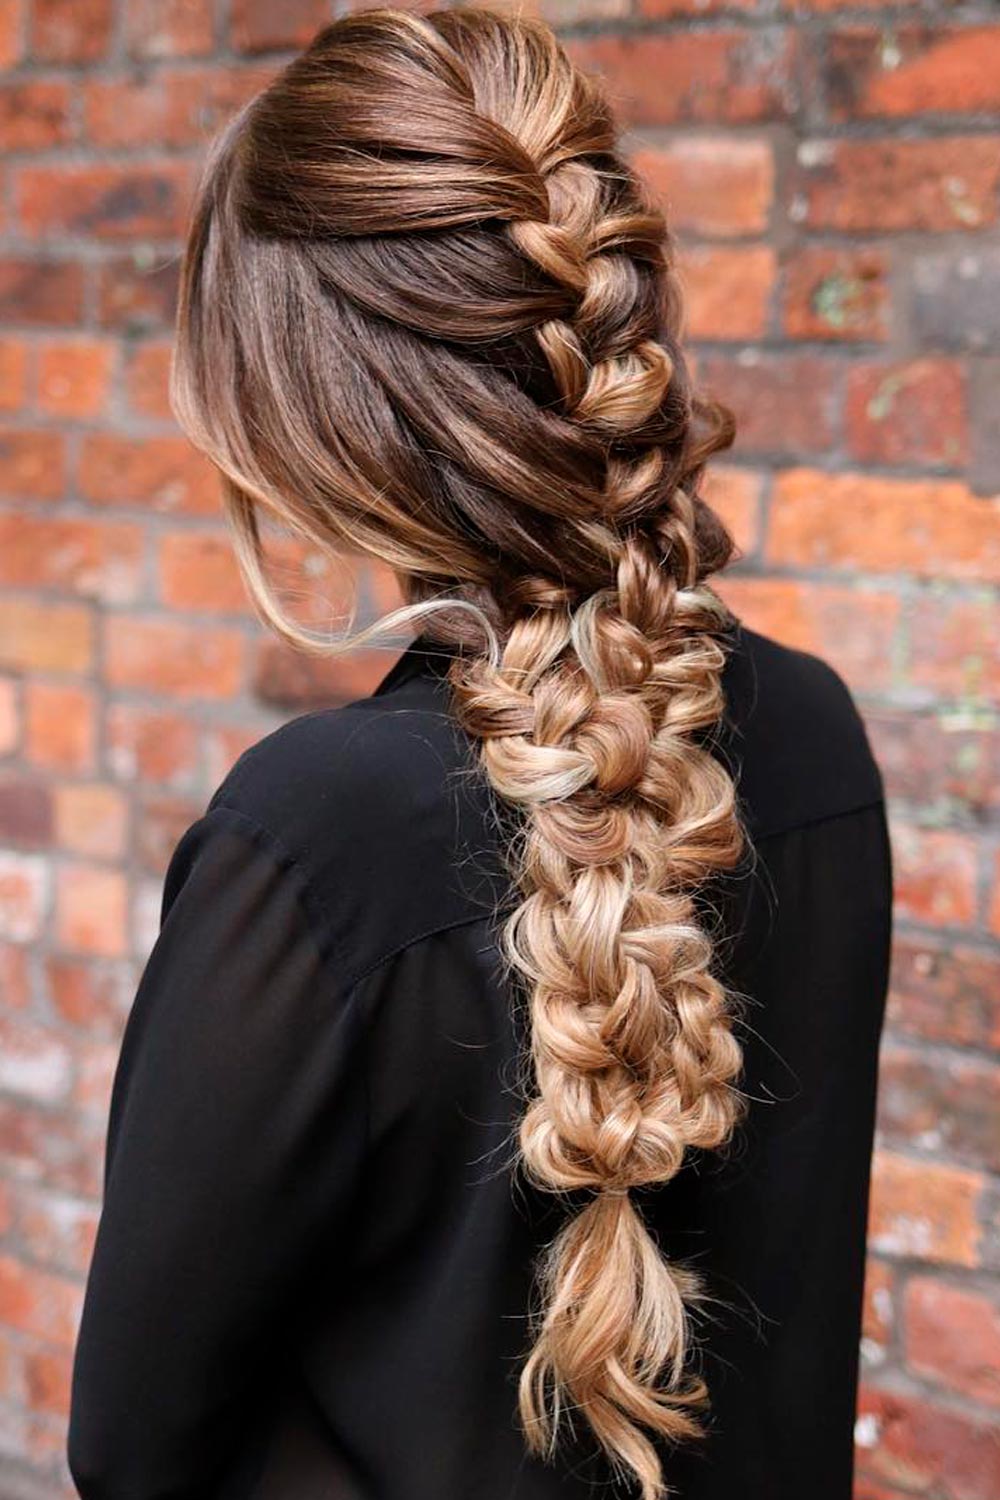 Voluminous Braided Hair for Christmas Party